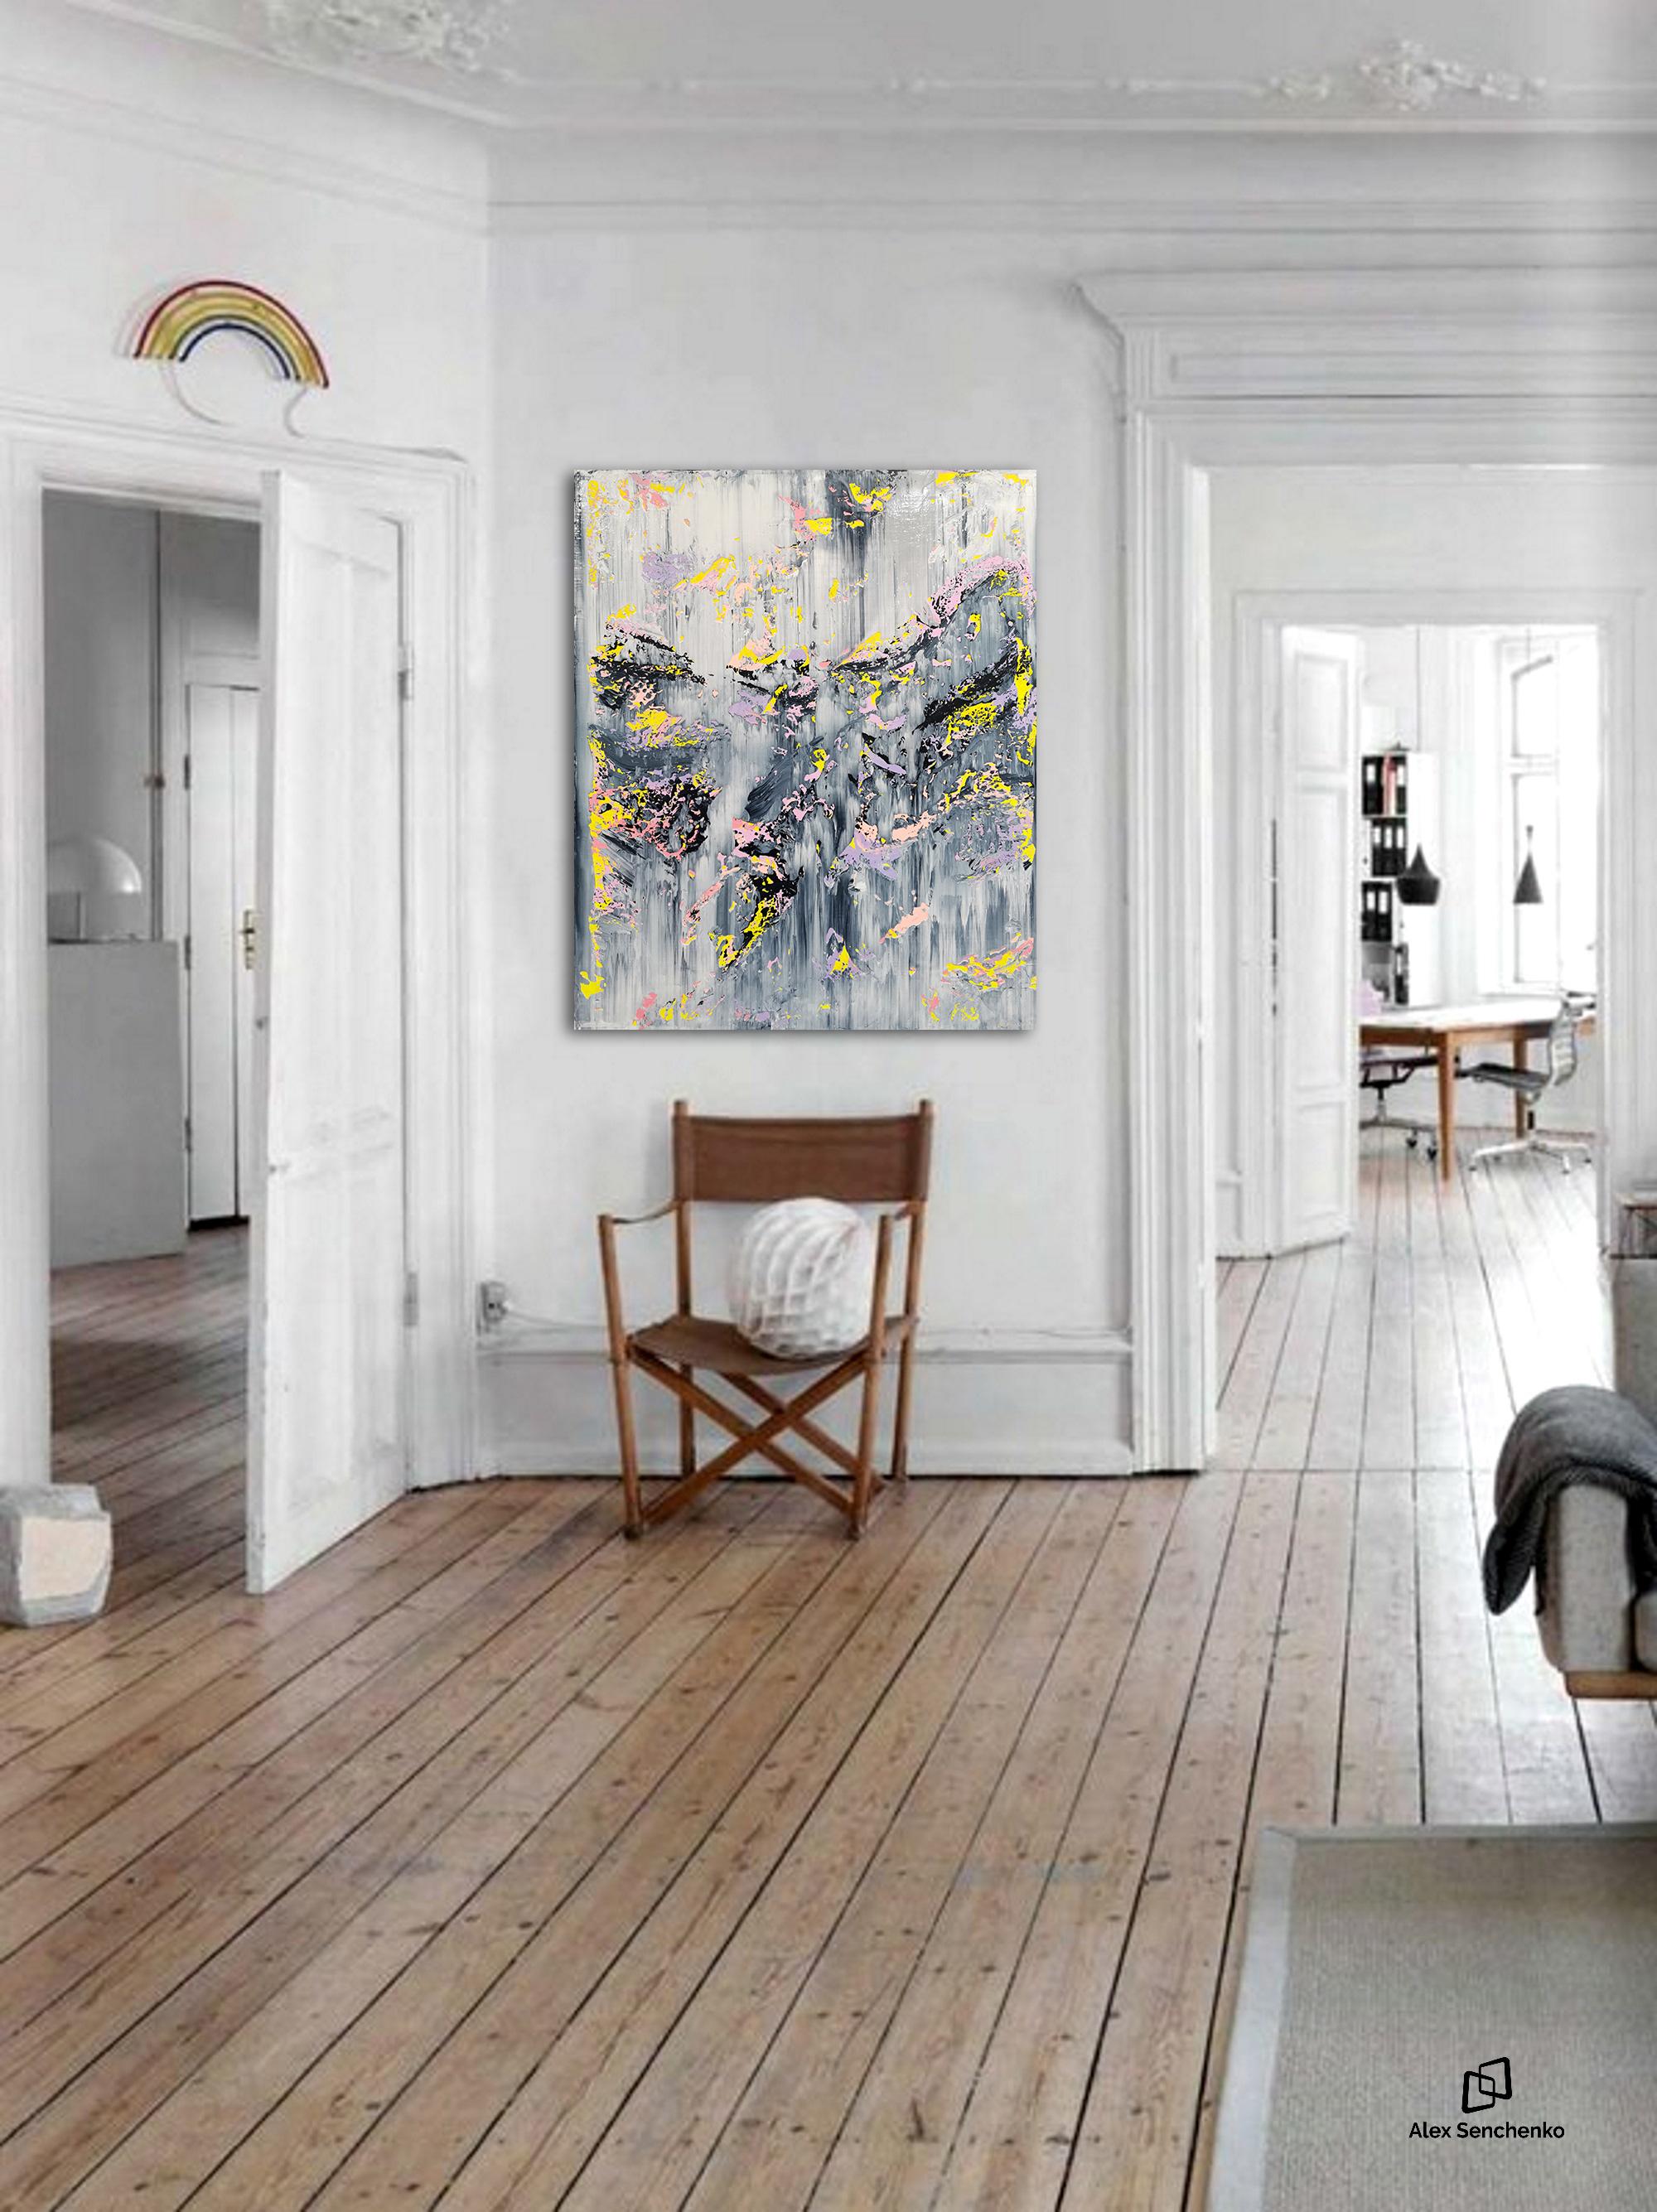 There’s something different about the homes of creative people. They like to surround themselves with inspiring things, from unique tablecloths to the incredible paintings on the walls.
Alex Senchenko’s - Abstract 2216 - can give your home that